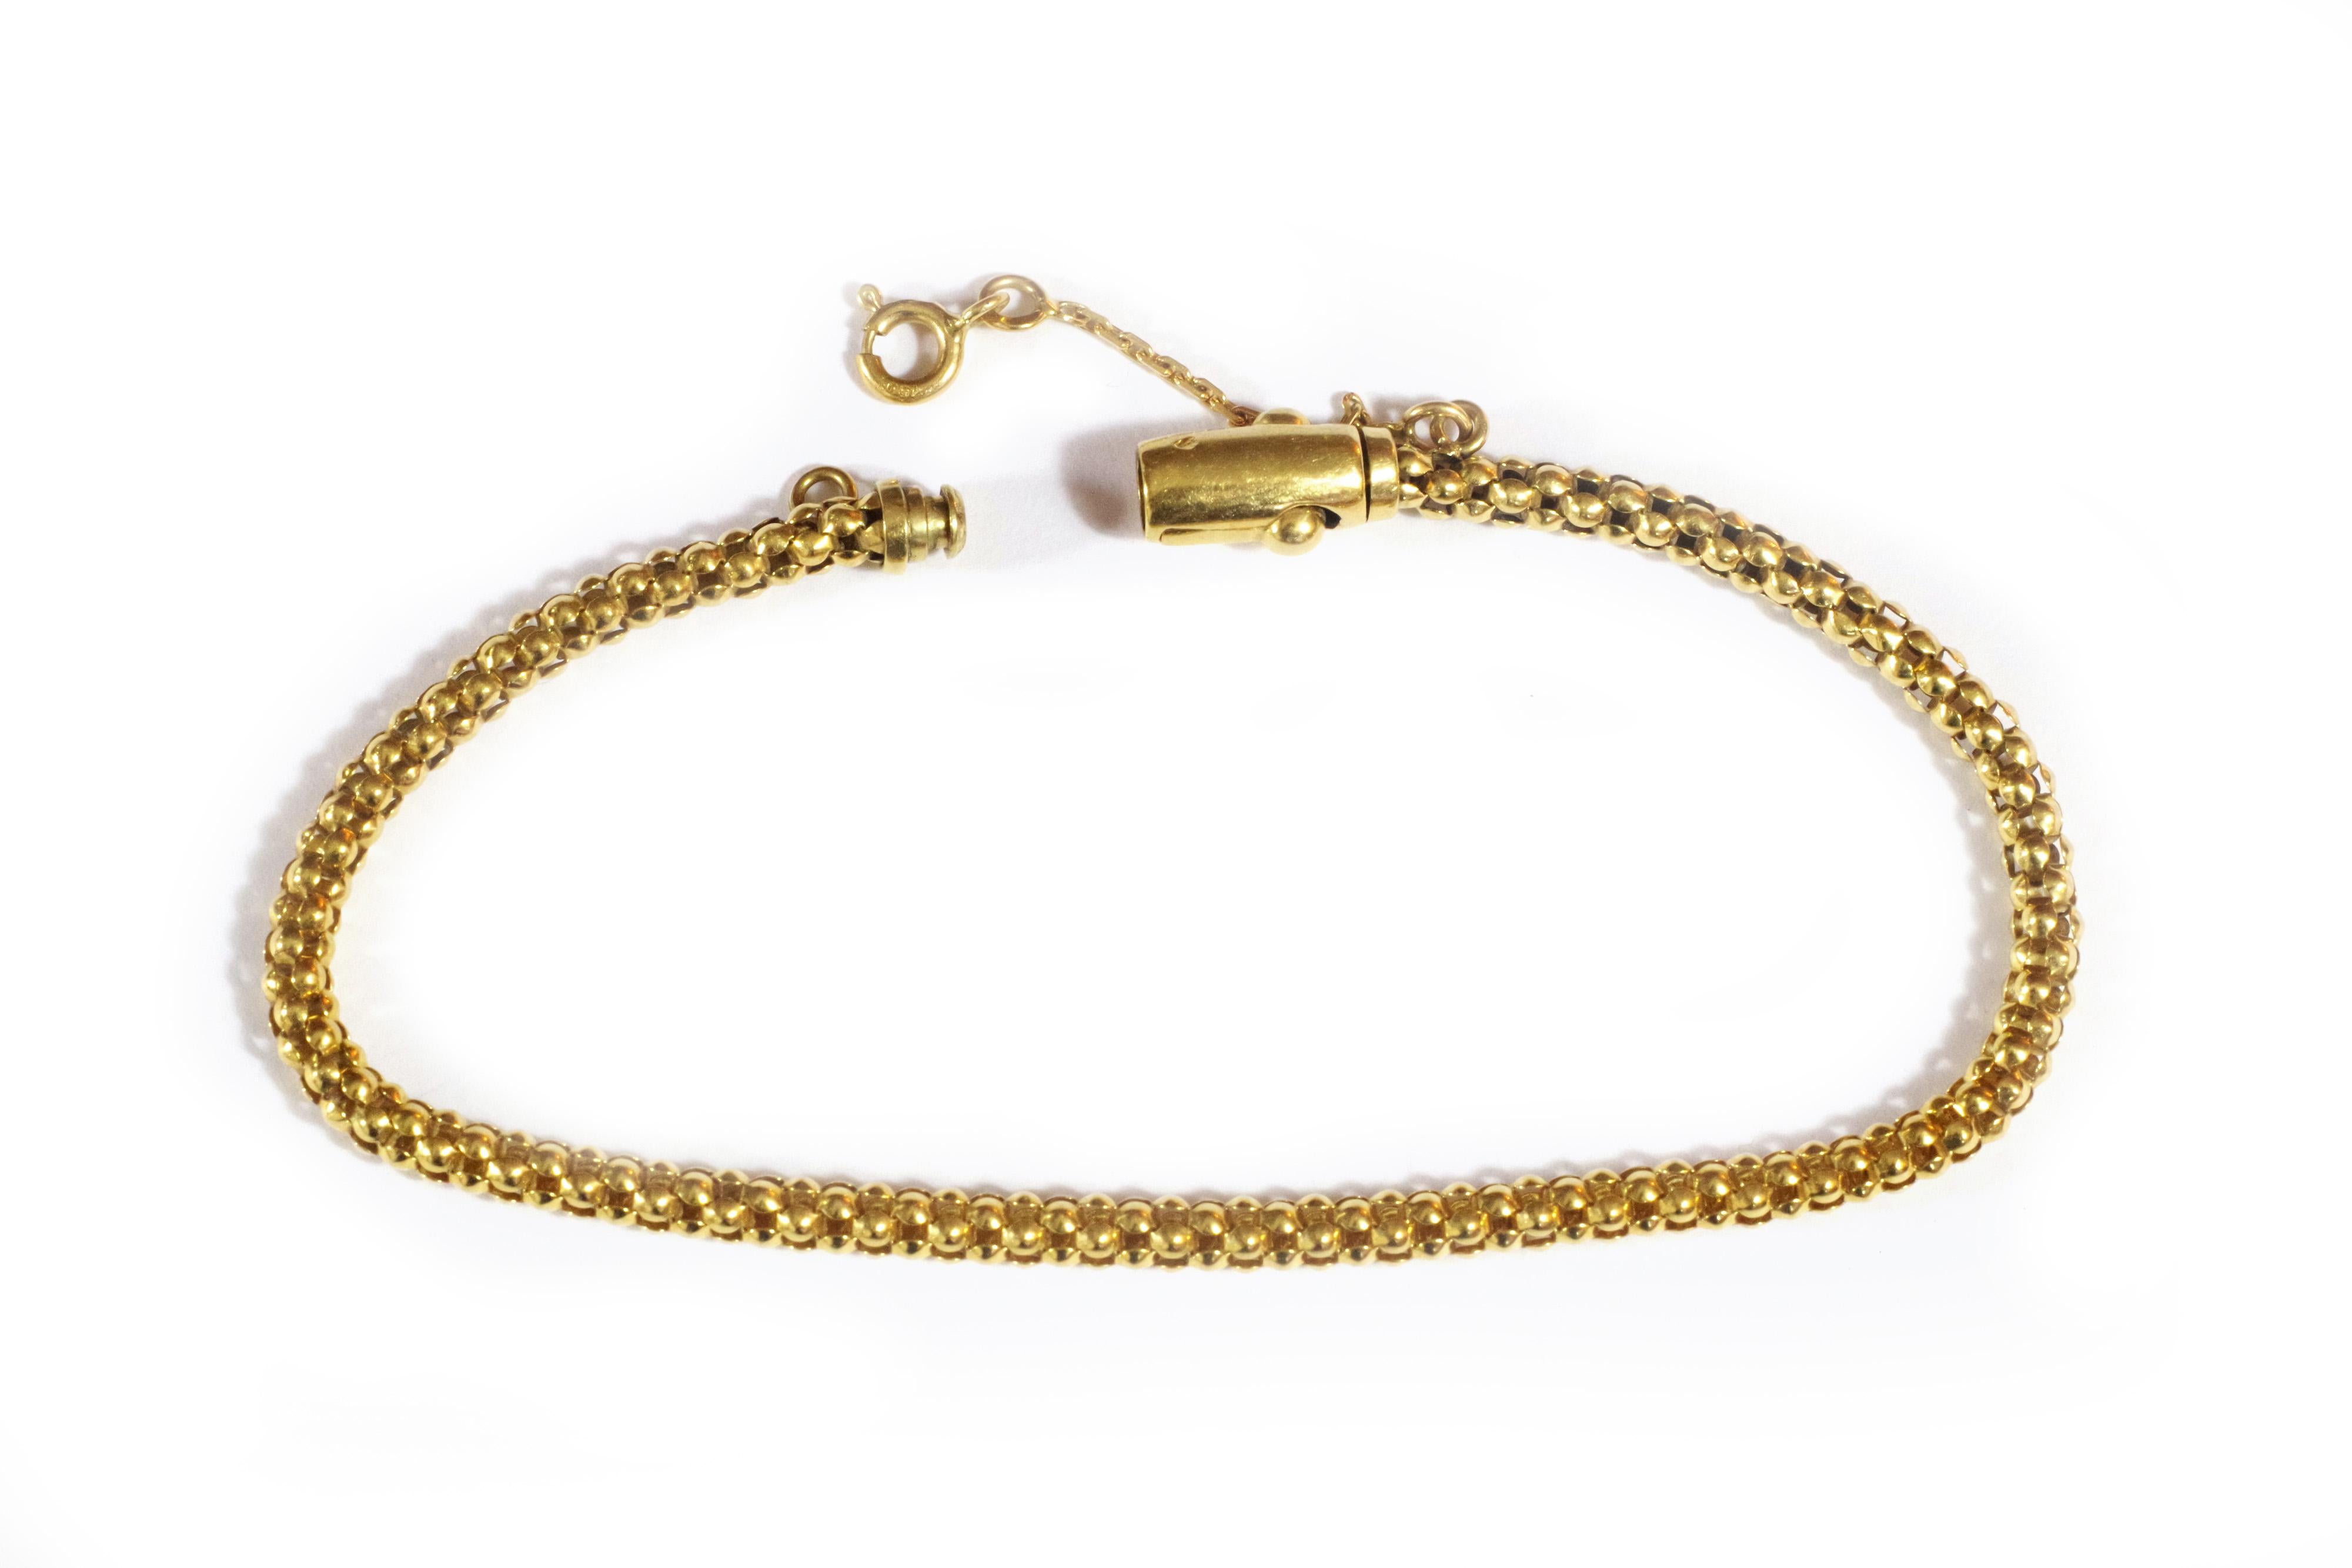 Italian gold bracelet attributed to Chimento

Vintage italian gold bracelet in 18 karats yellow gold with flexible and extensible fancy links. Clasp with cylindrical shape and safety chain. Bracelet attributed to Chimento, the Italian House, work